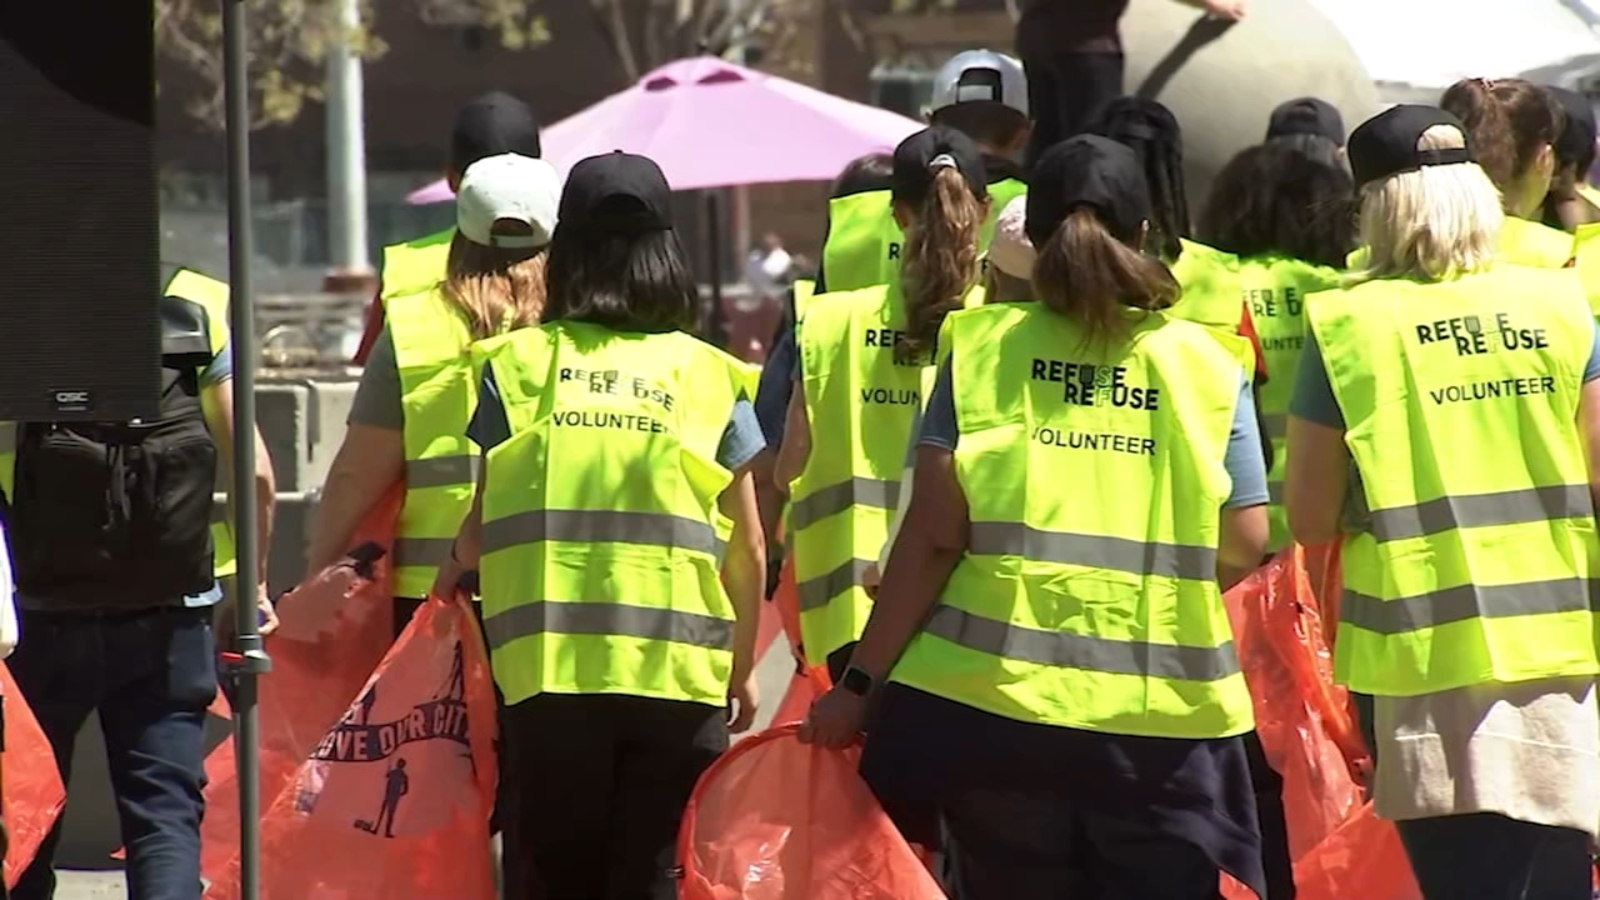 200+ San Francisco office workers from 5 companies volunteer to clean up downtown [Video]